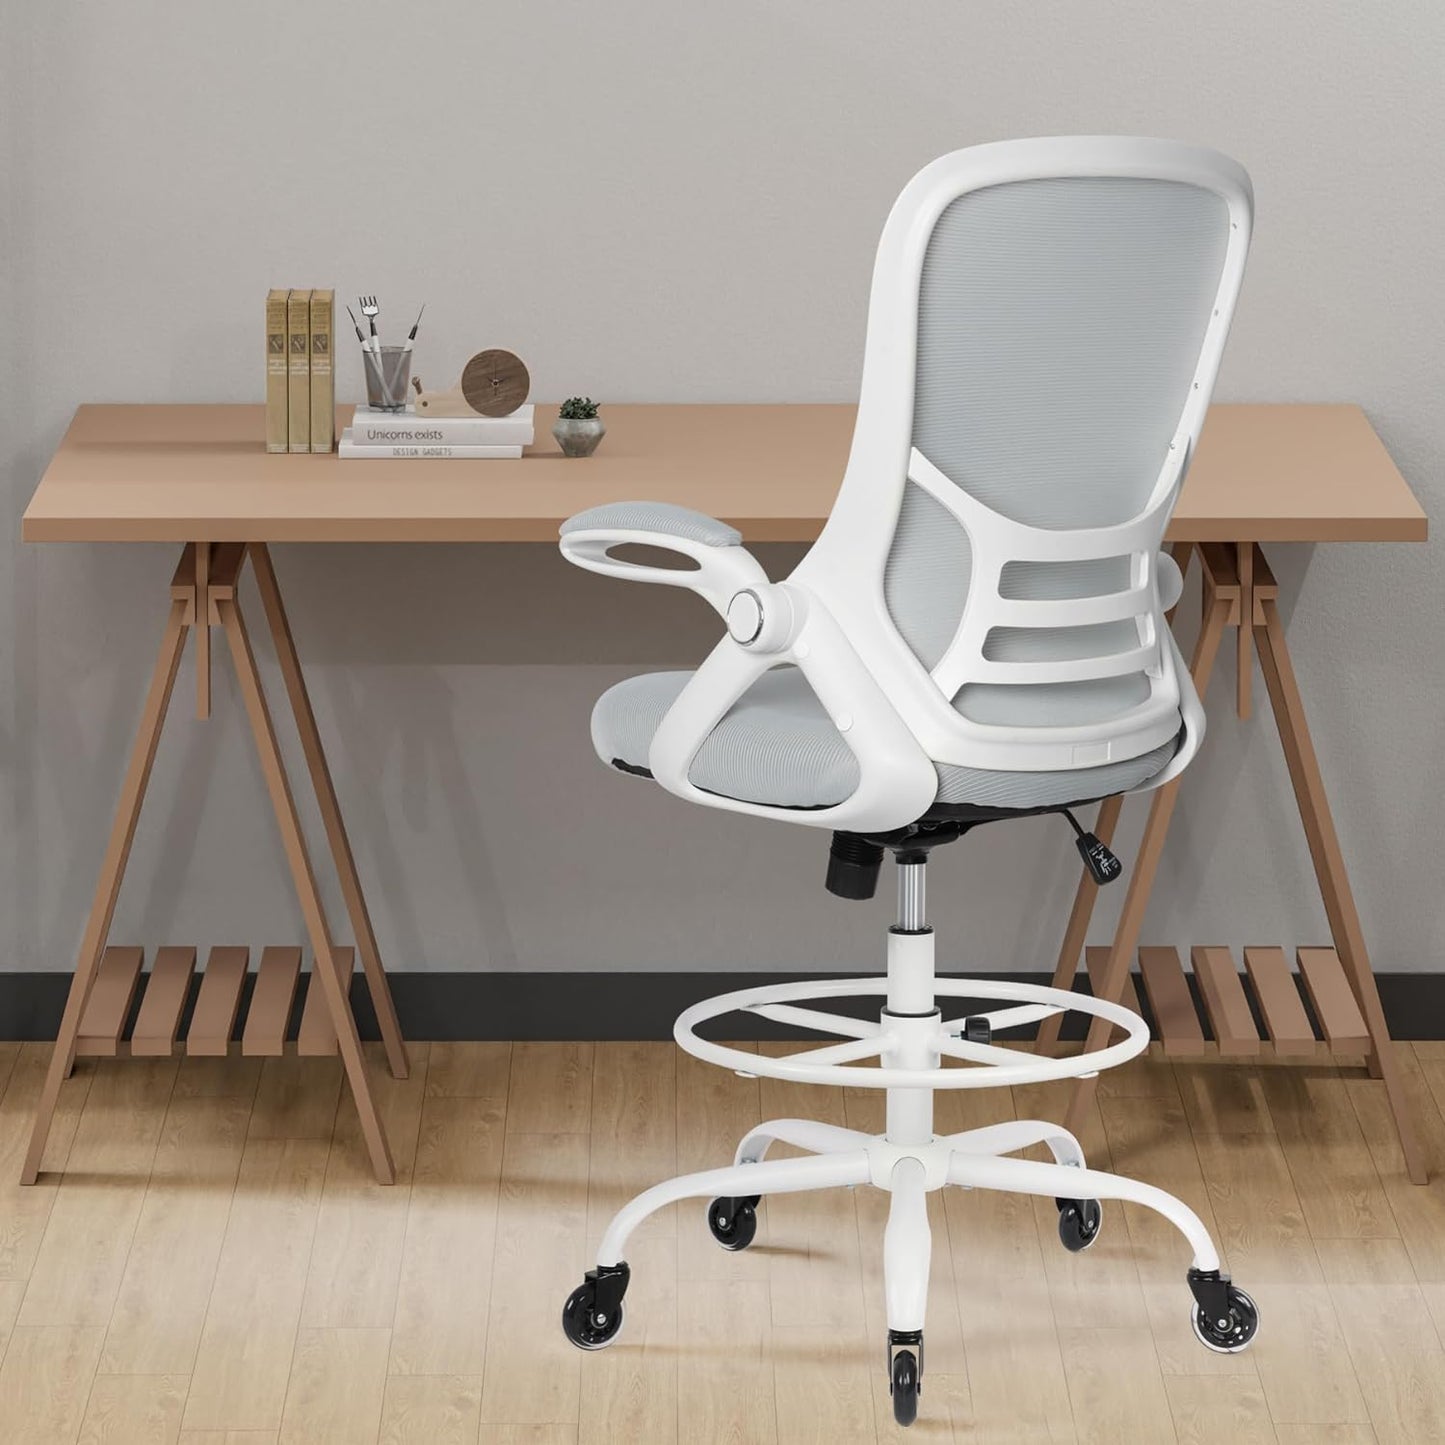 HYLONE Drafting Chair Tall Office Chair, High Ergonomic Standing Desk Computer Stools with Rubber Wheels, Flip-up Armrests, Adj